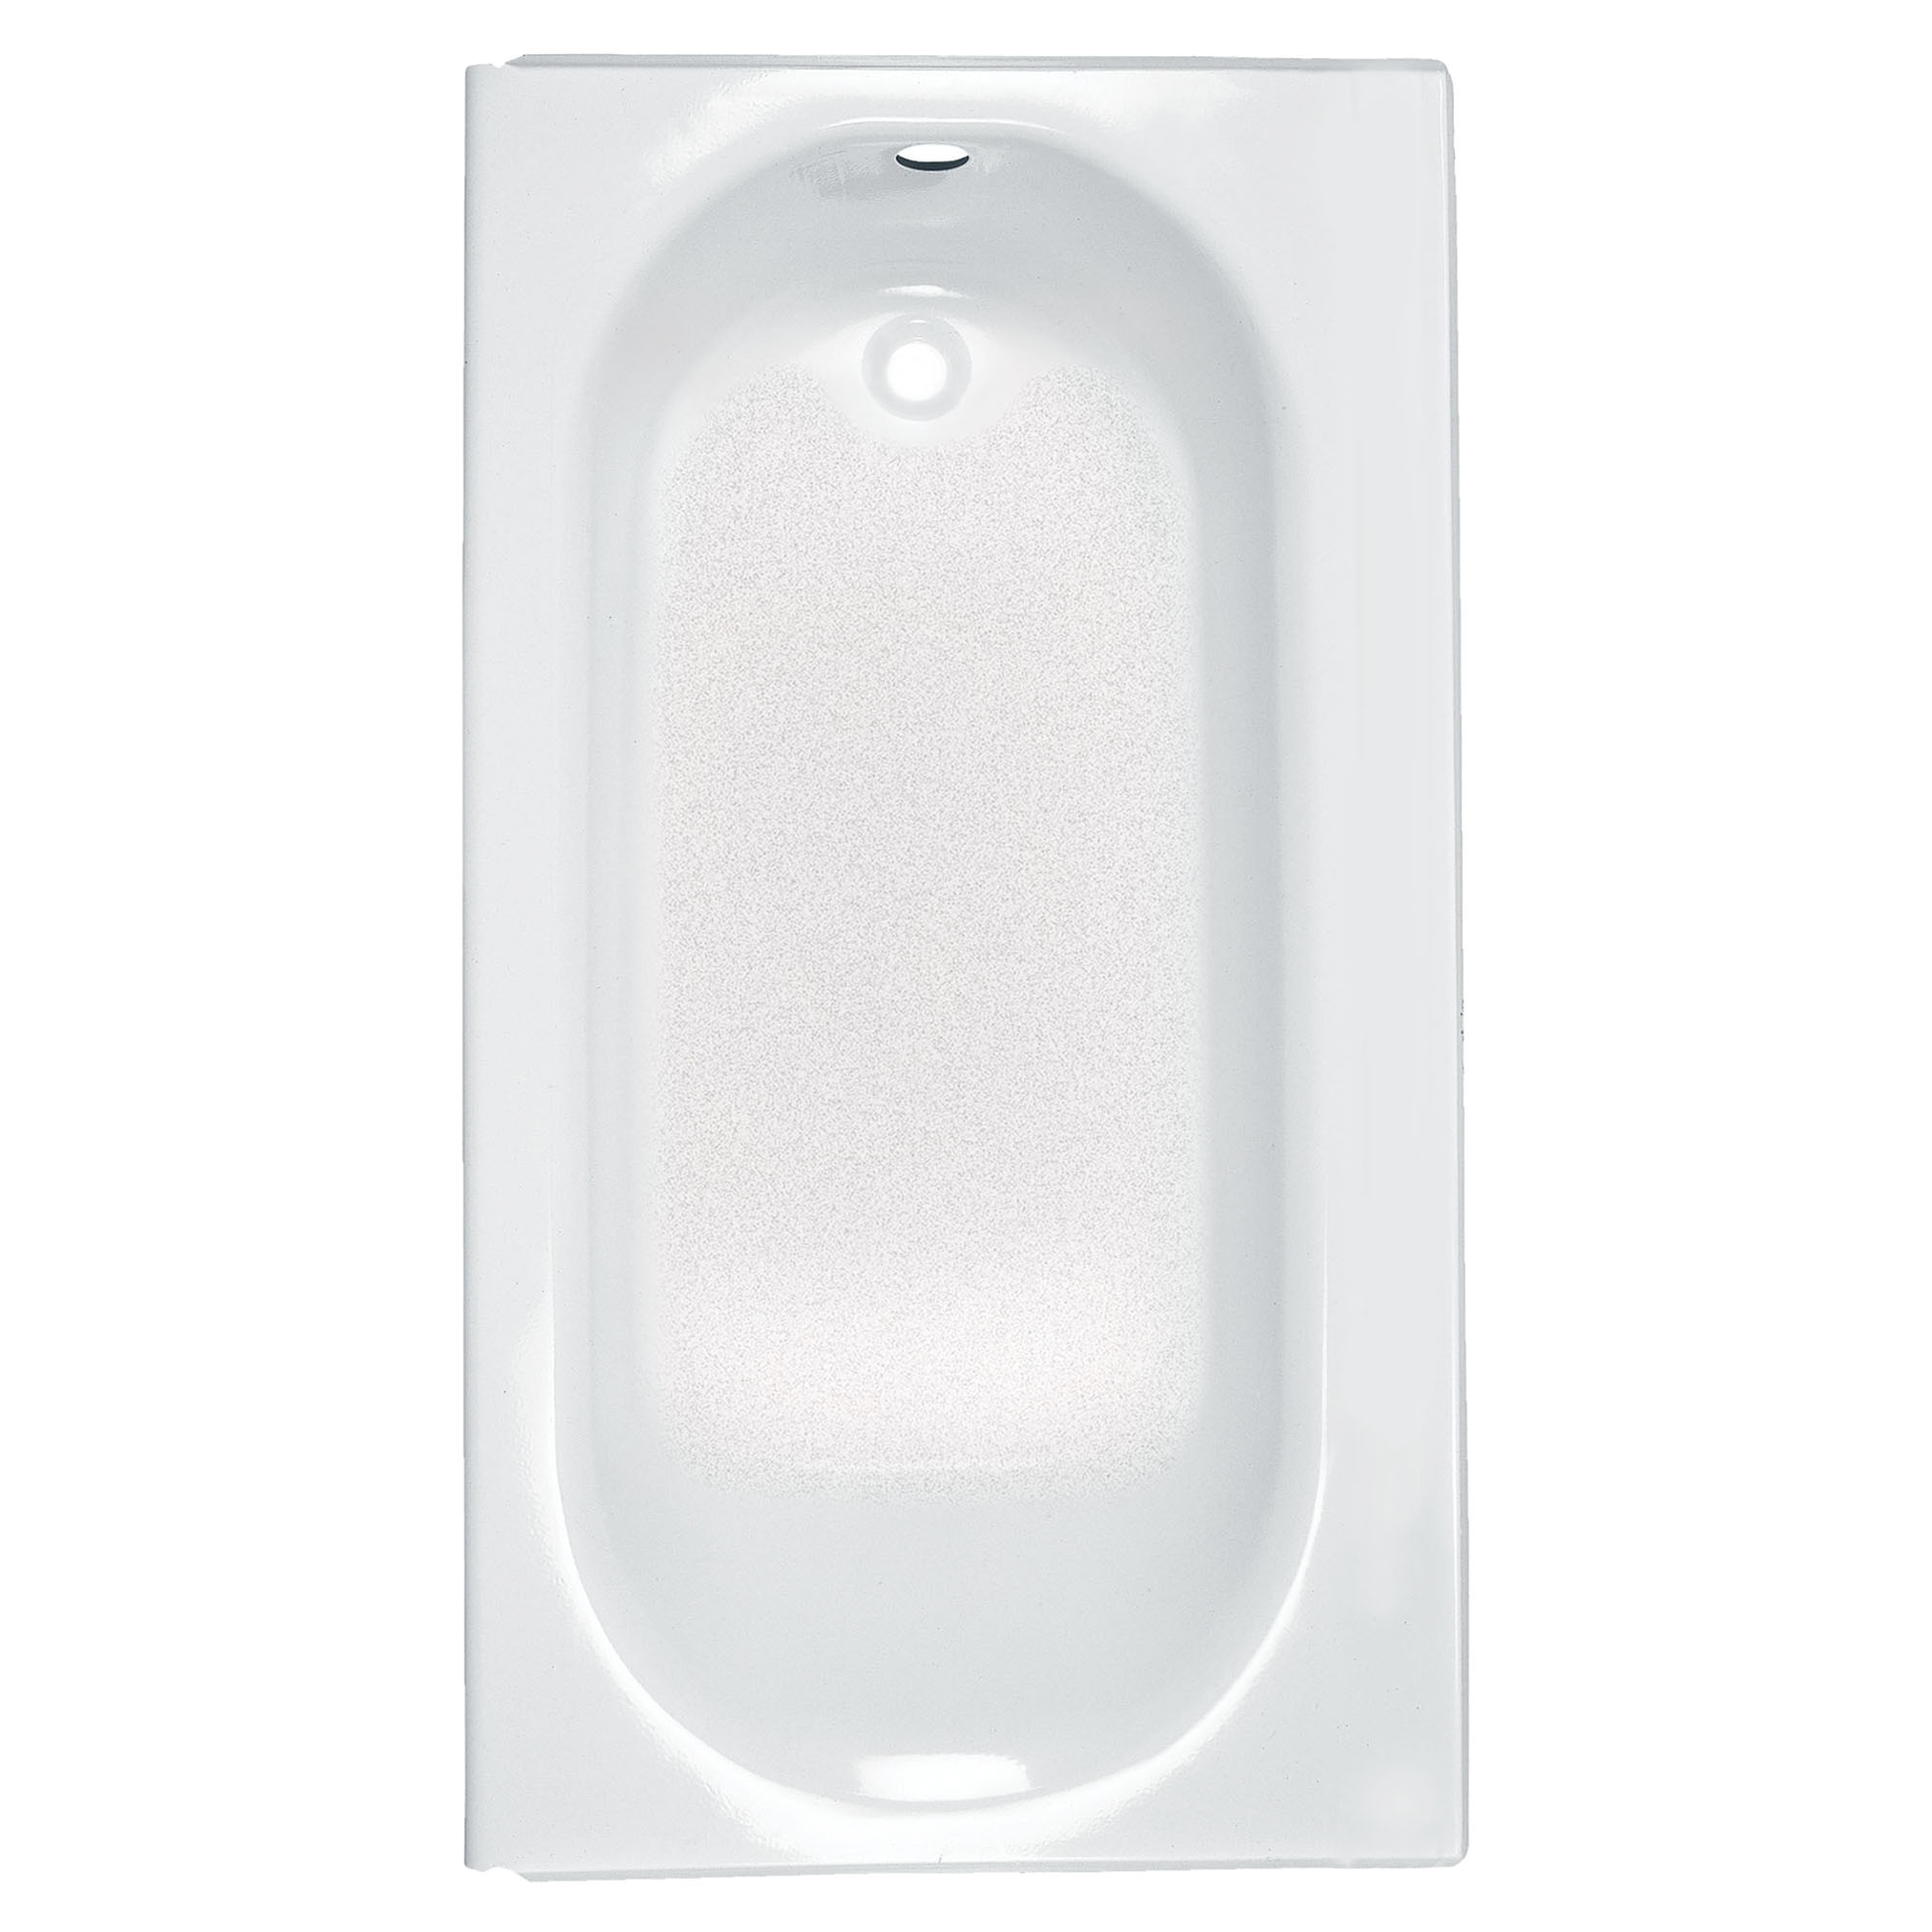 Princeton® Americast® 60 x 34-Inch Integral Apron Bathtub Left-Hand Outlet With Luxury Ledge